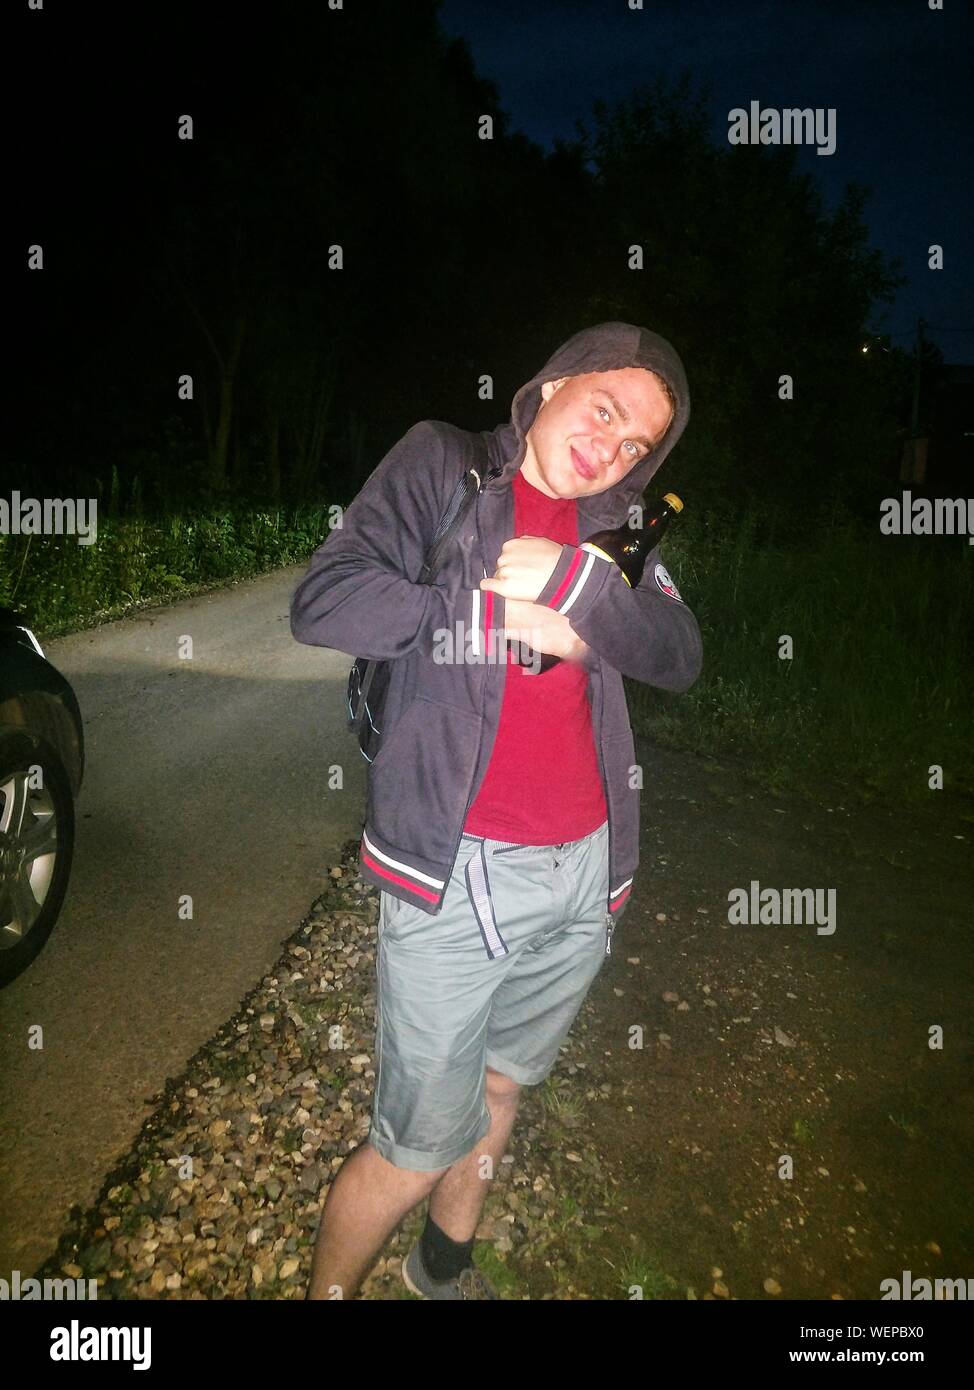 Portrait Of Smiling Man In Hood Clothing Standing On Footpath At Night Stock Photo